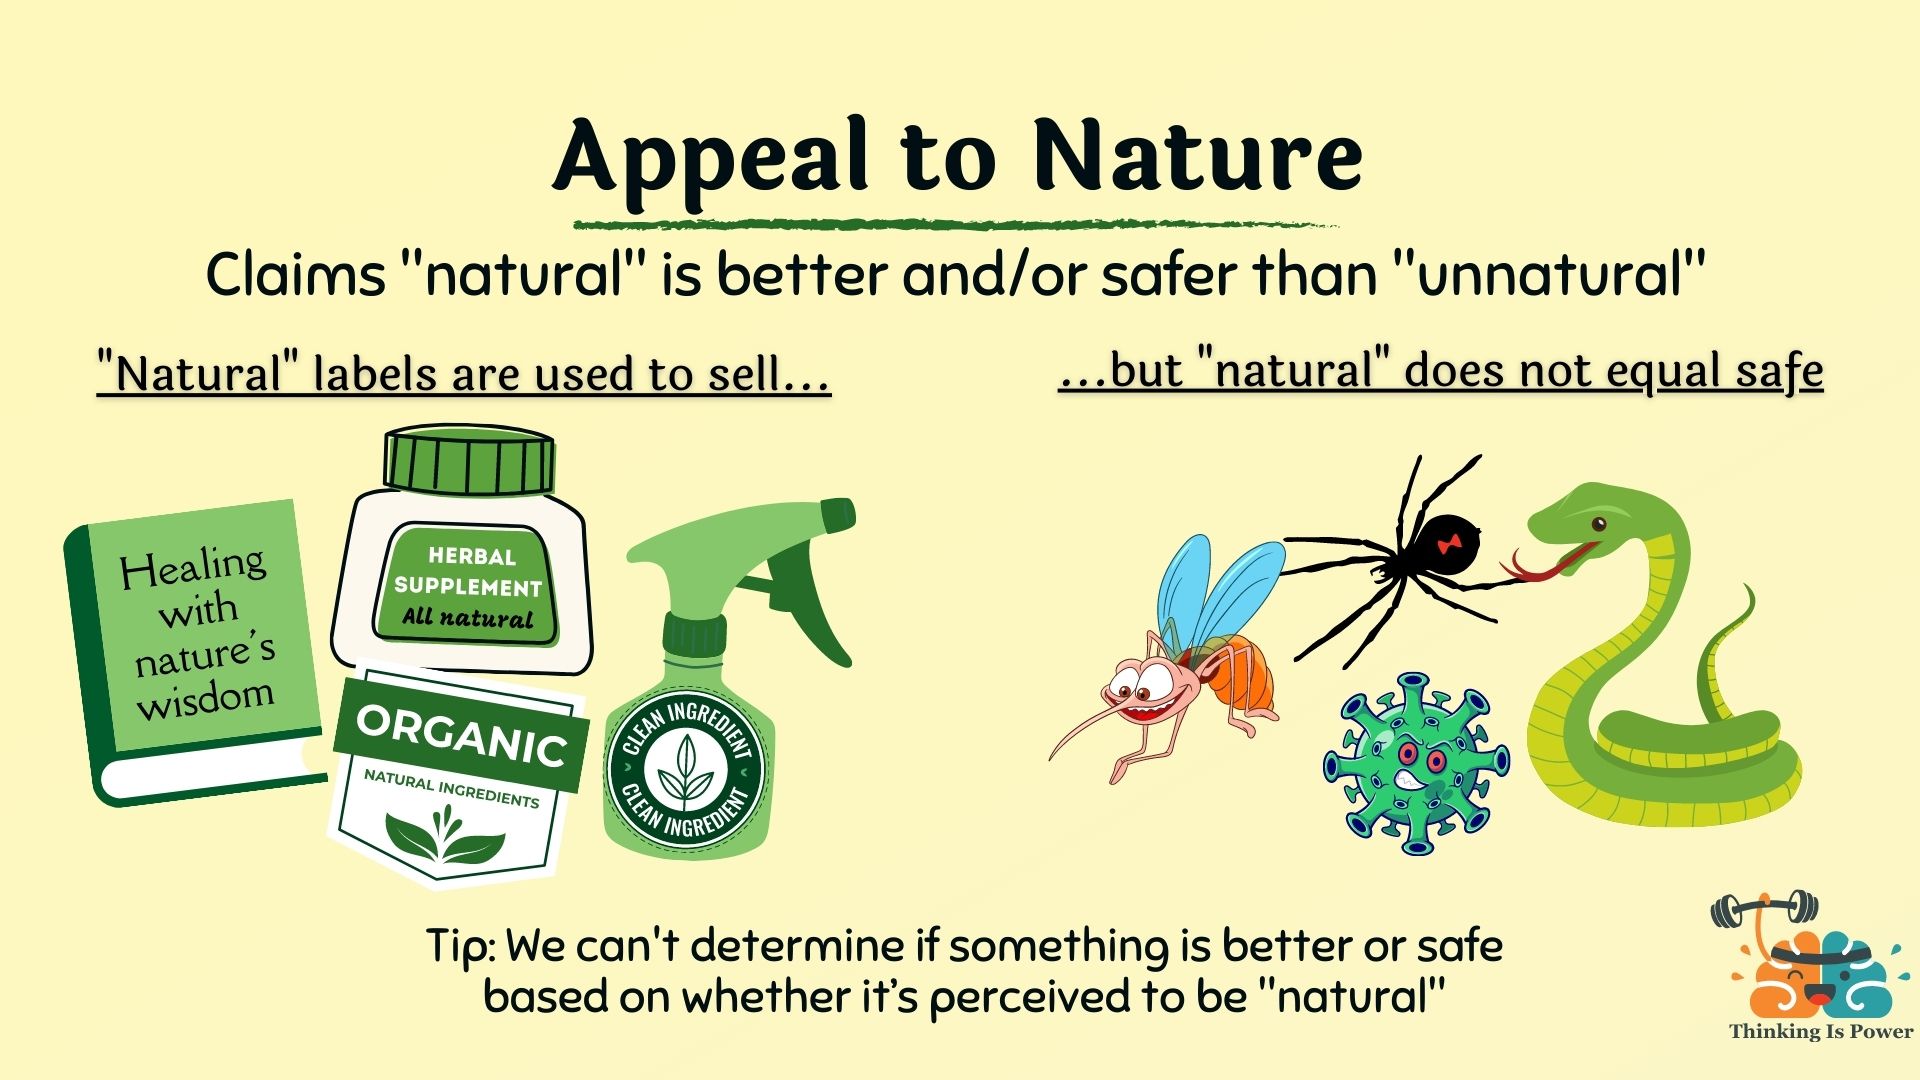 Appeal to nature fallacy claims natural is good and/or unnatural is bad; advertisements all natural, herbal supplement, nature's best remedies, plant-based cleaner, organic non-GMO water, chemical-free and non-toxic beauty cream; it's a myth because nature can be harmful examples black death arsenic tape worms asbestos smallpox black widow spiders; synthetic can be good examples vaccines antibiotics toilets fertilizers pasteurization chemotherapy satellites drugs